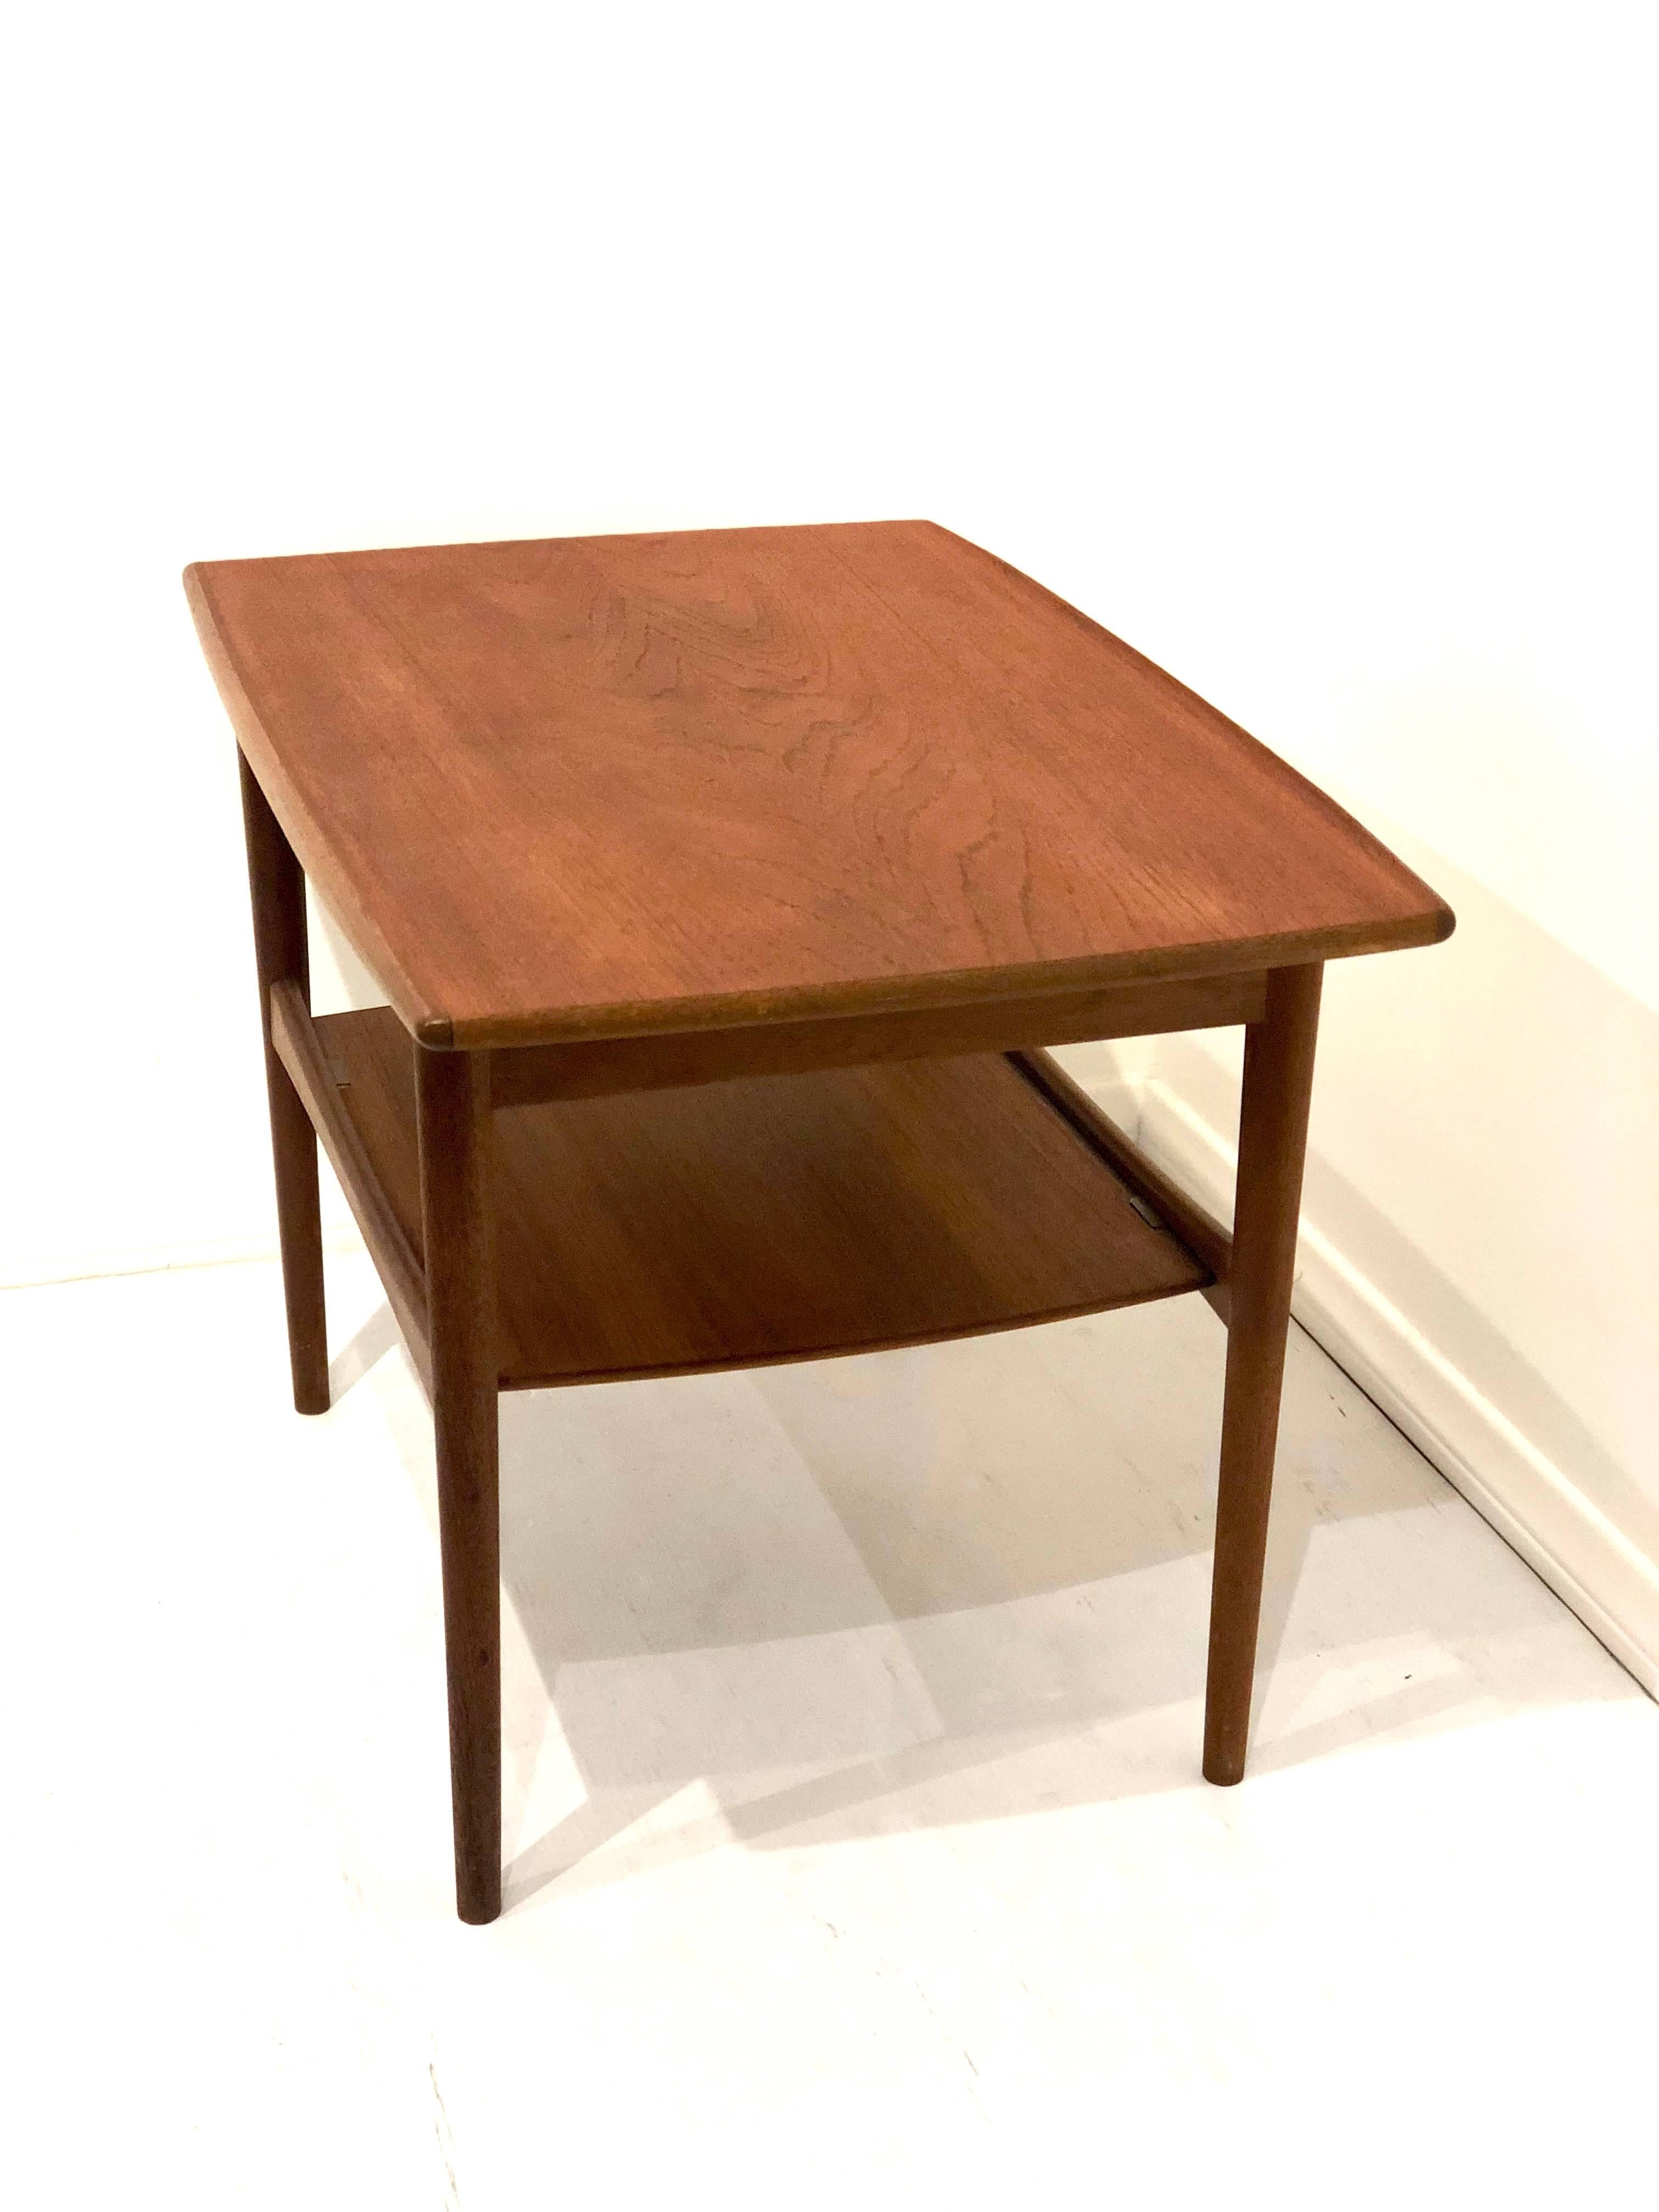 Beautiful simple and elegant end cocktail table by Moreddi in teak with raised edge and shelf nice clean condition no chips or scratches. Stamped at the bottom with Danish Control tag high end and craftsmanship.